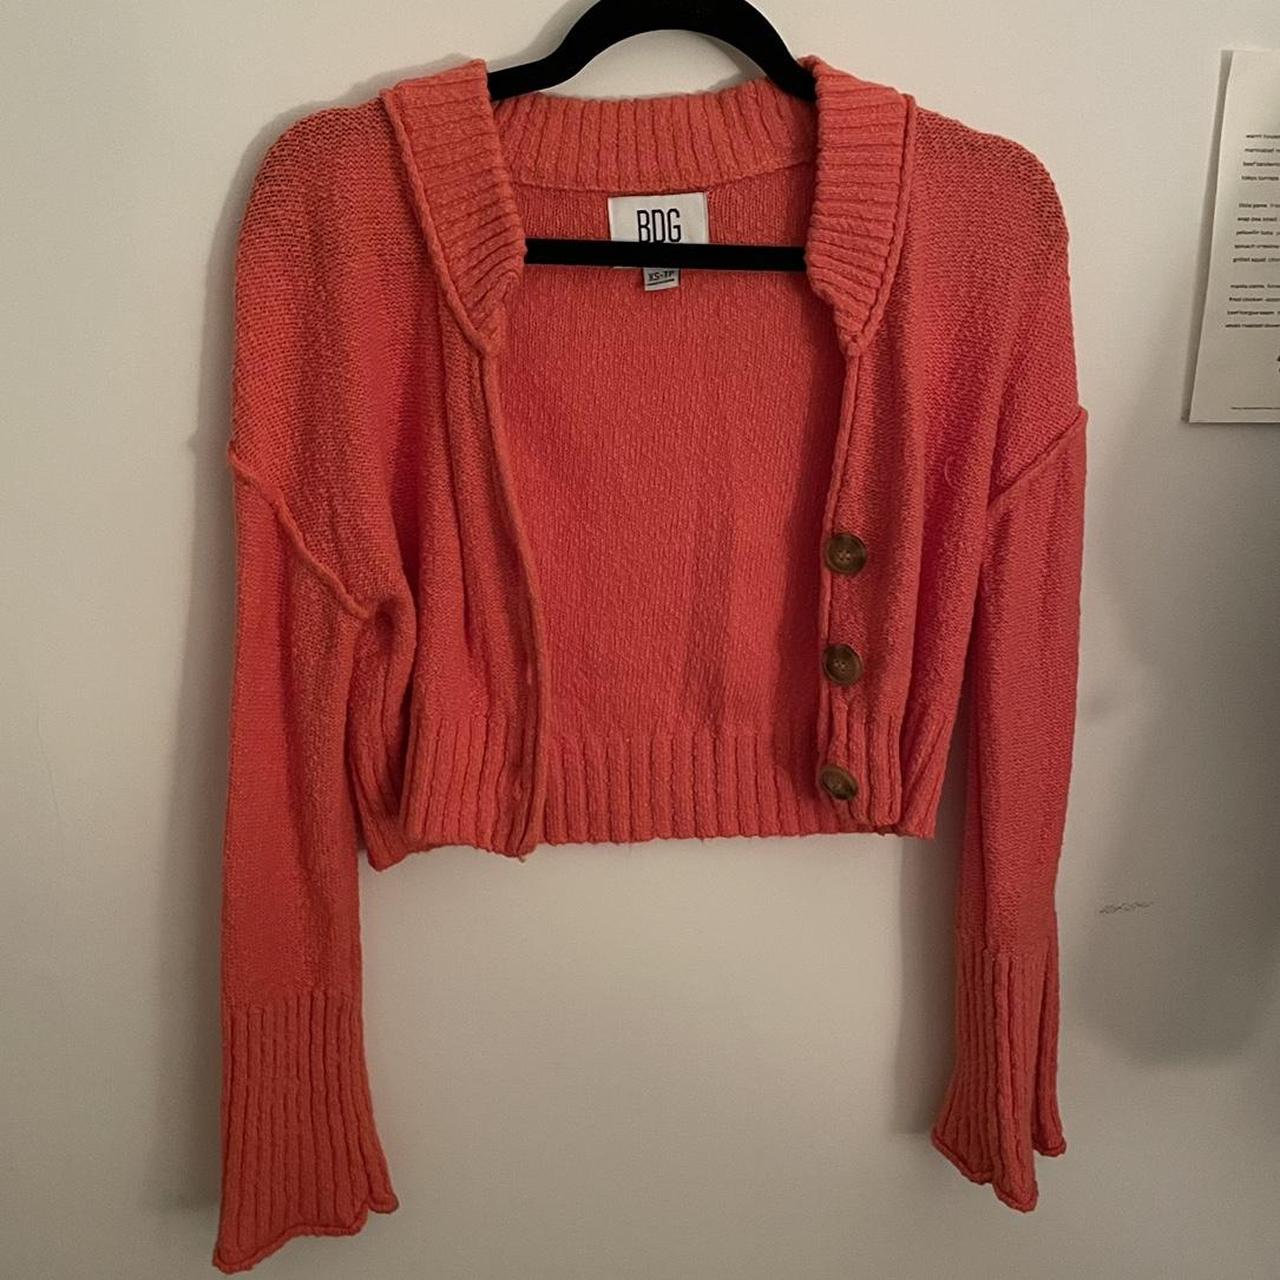 Urban Outfitters Women's Orange and Red Cardigan (2)